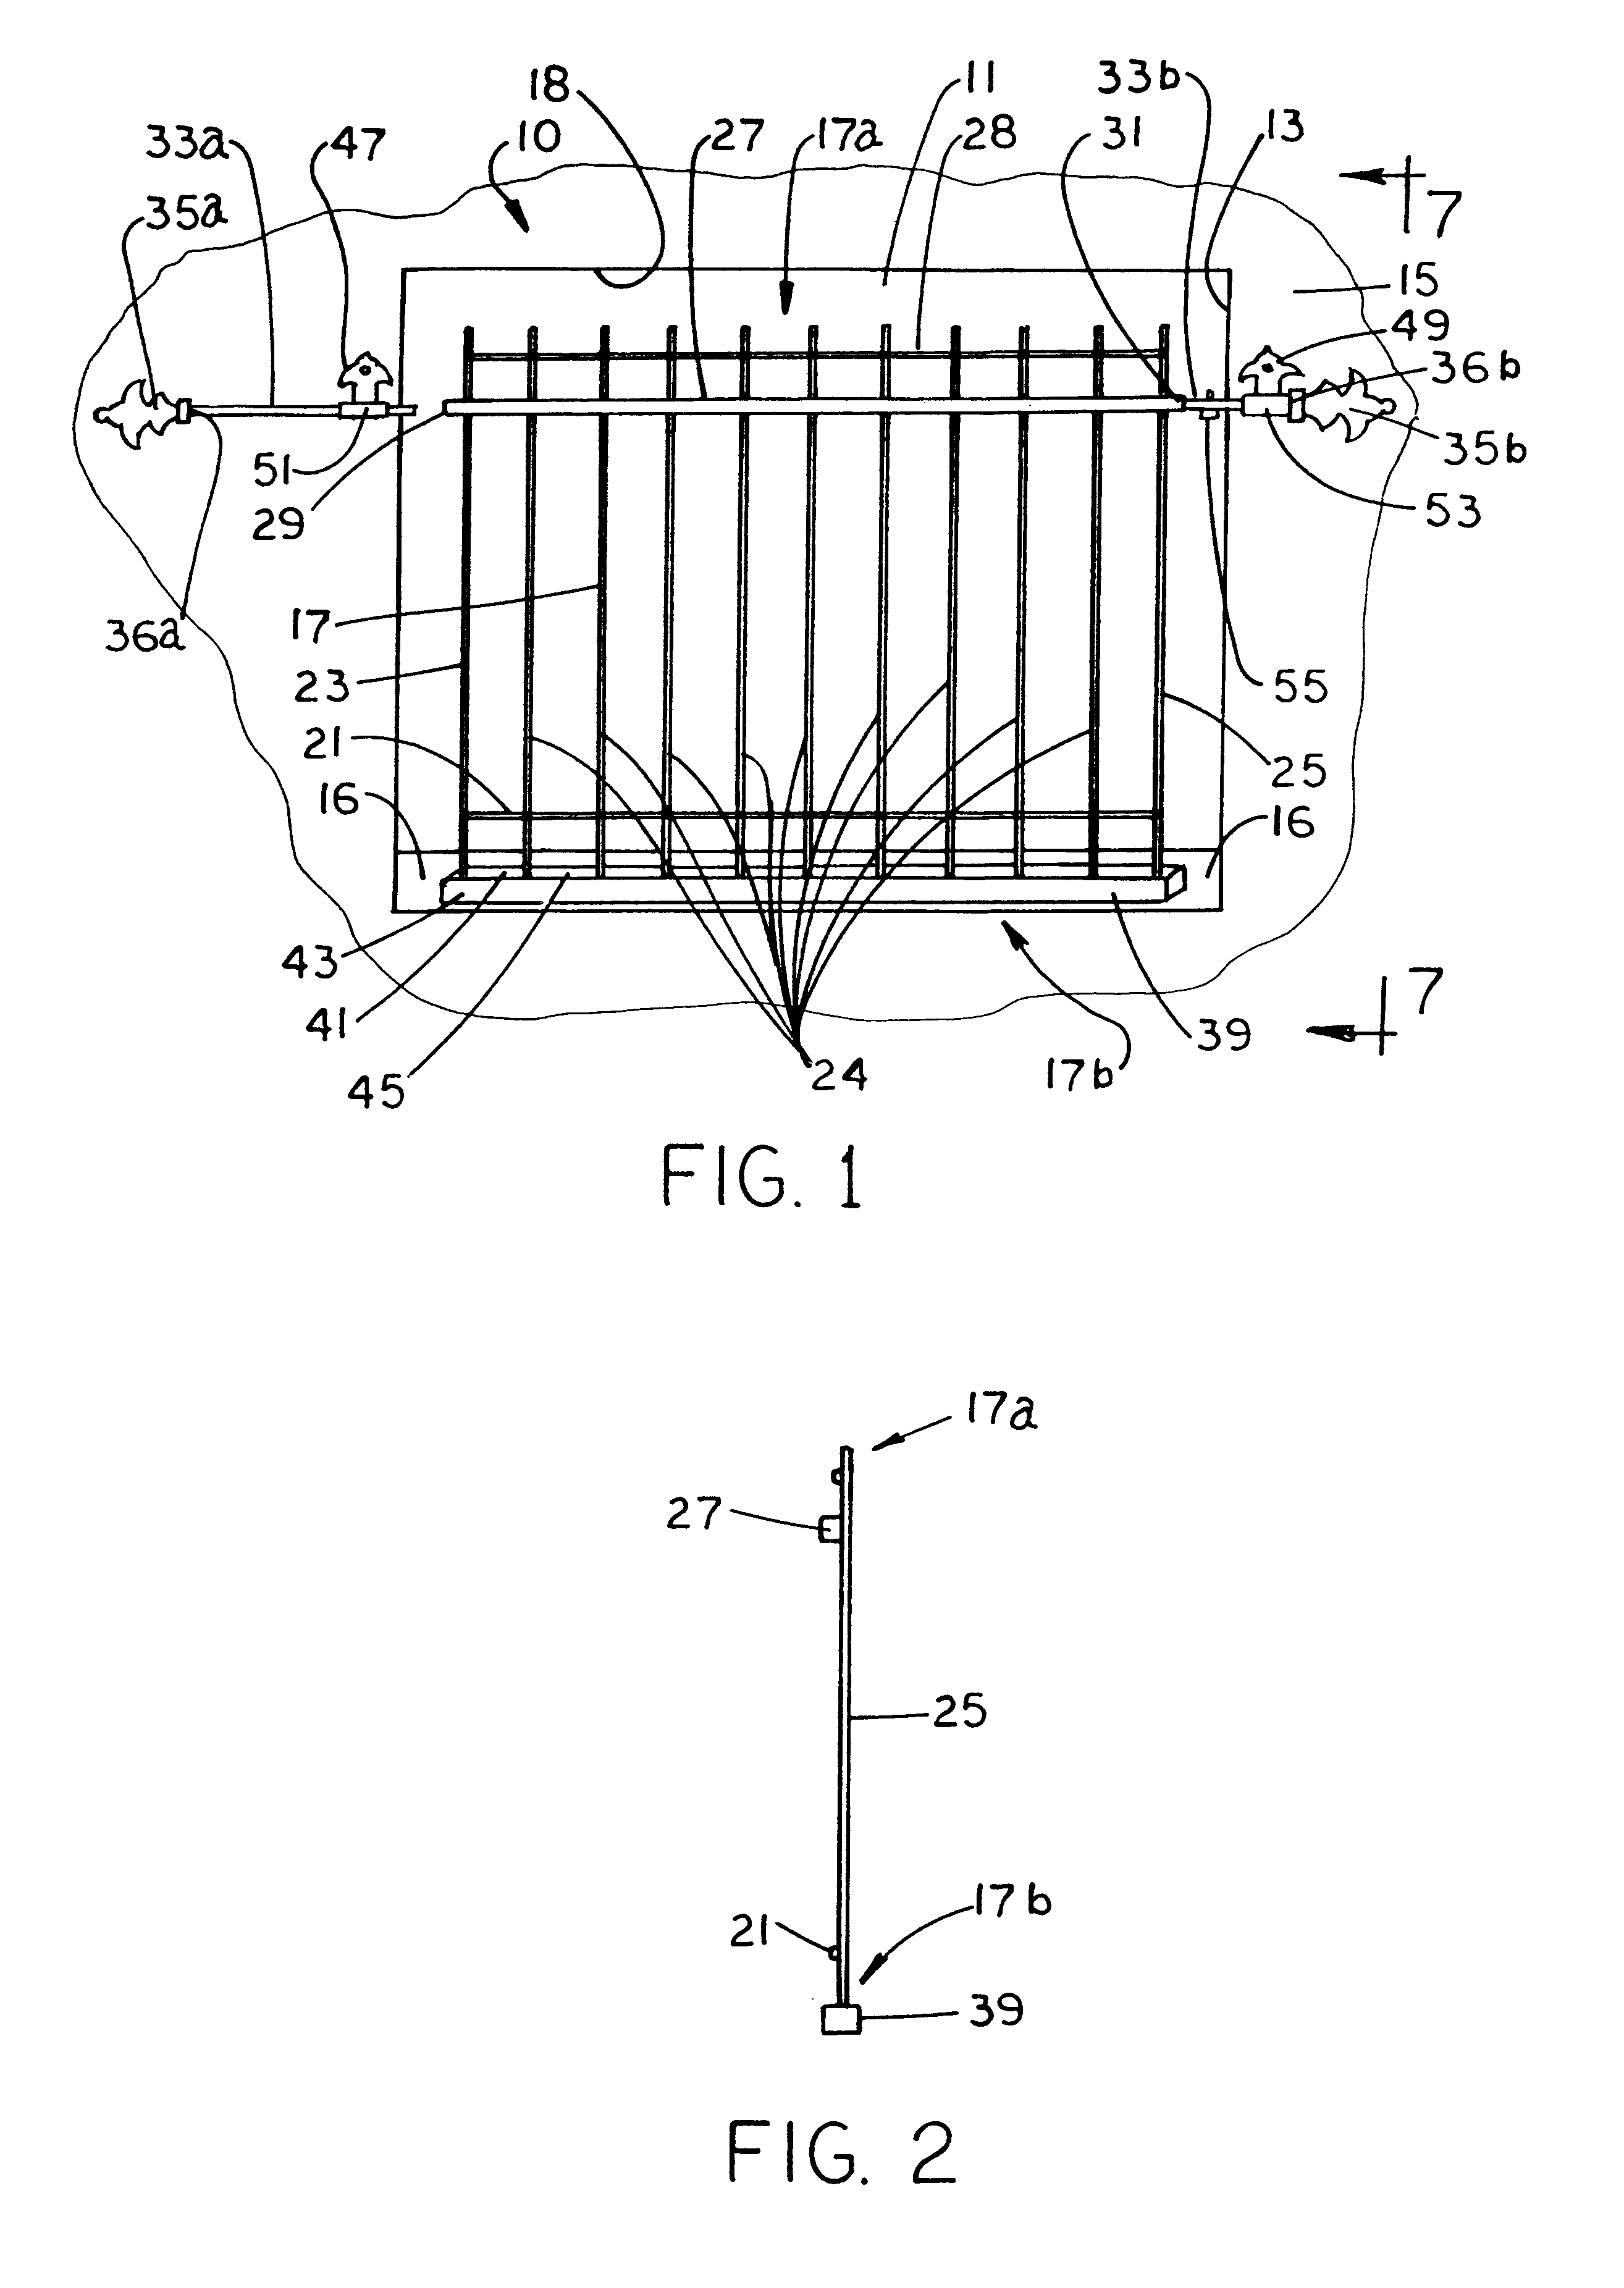 Removable security apparatus for building openings with quick-release latch mechanism